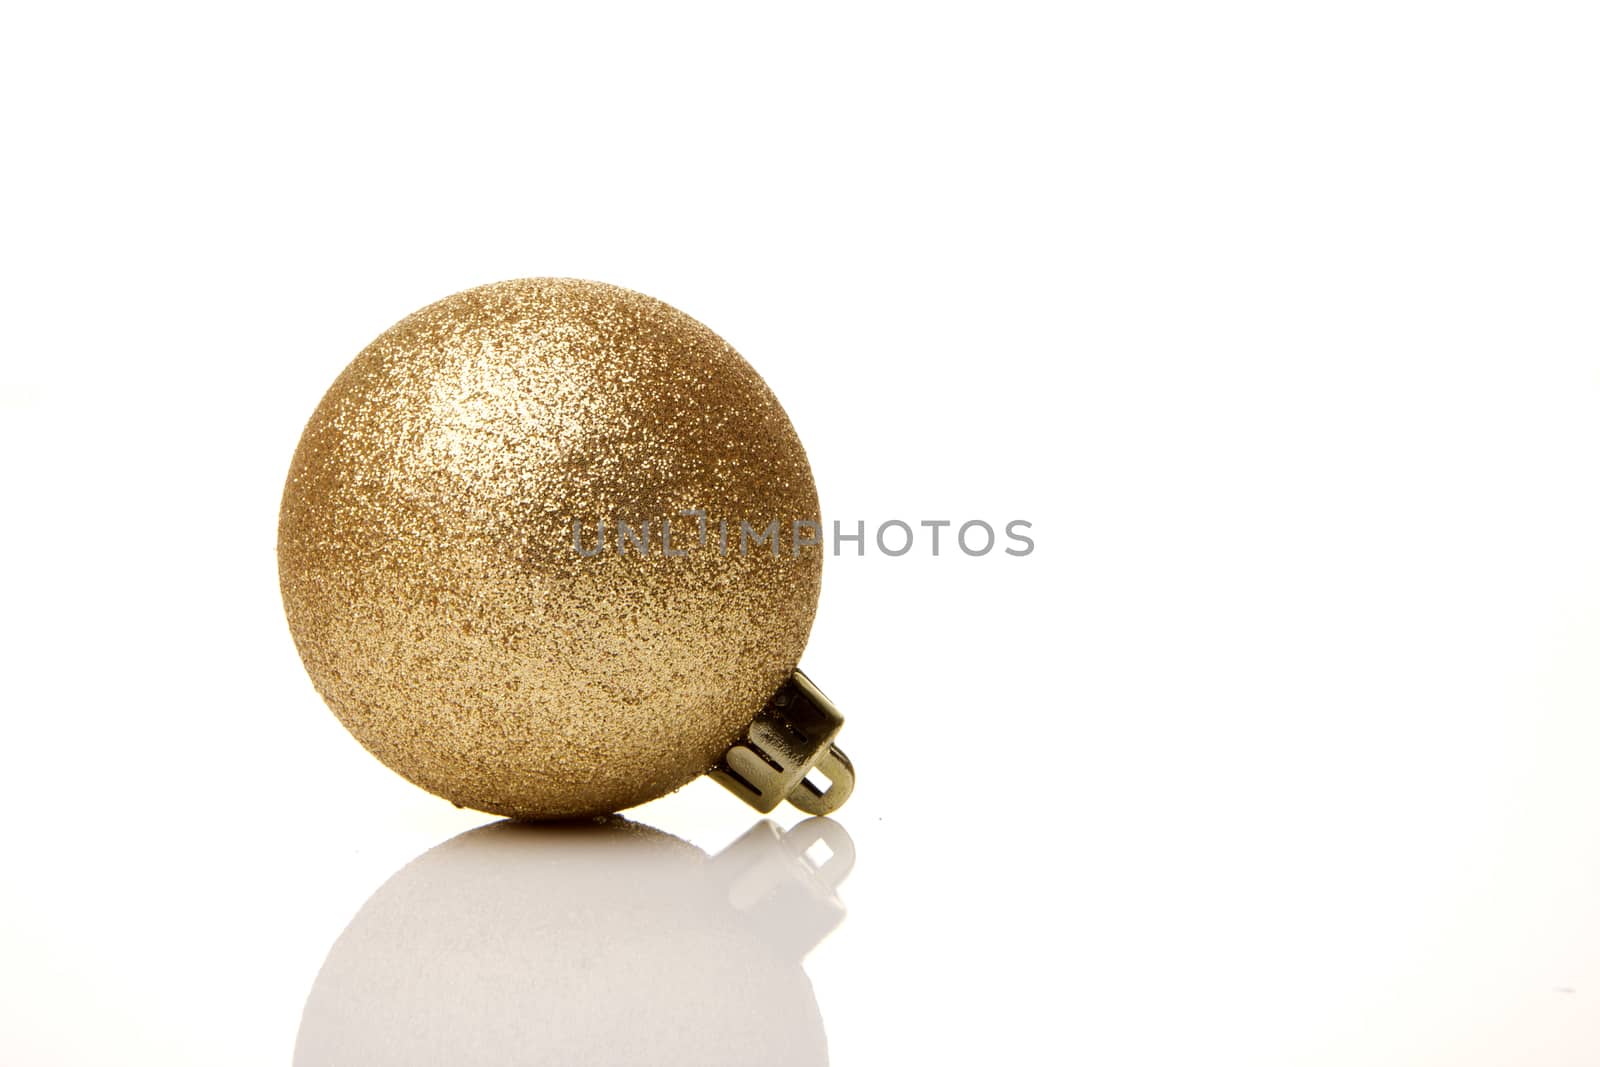 christmas ornament gold by Tomjac1980